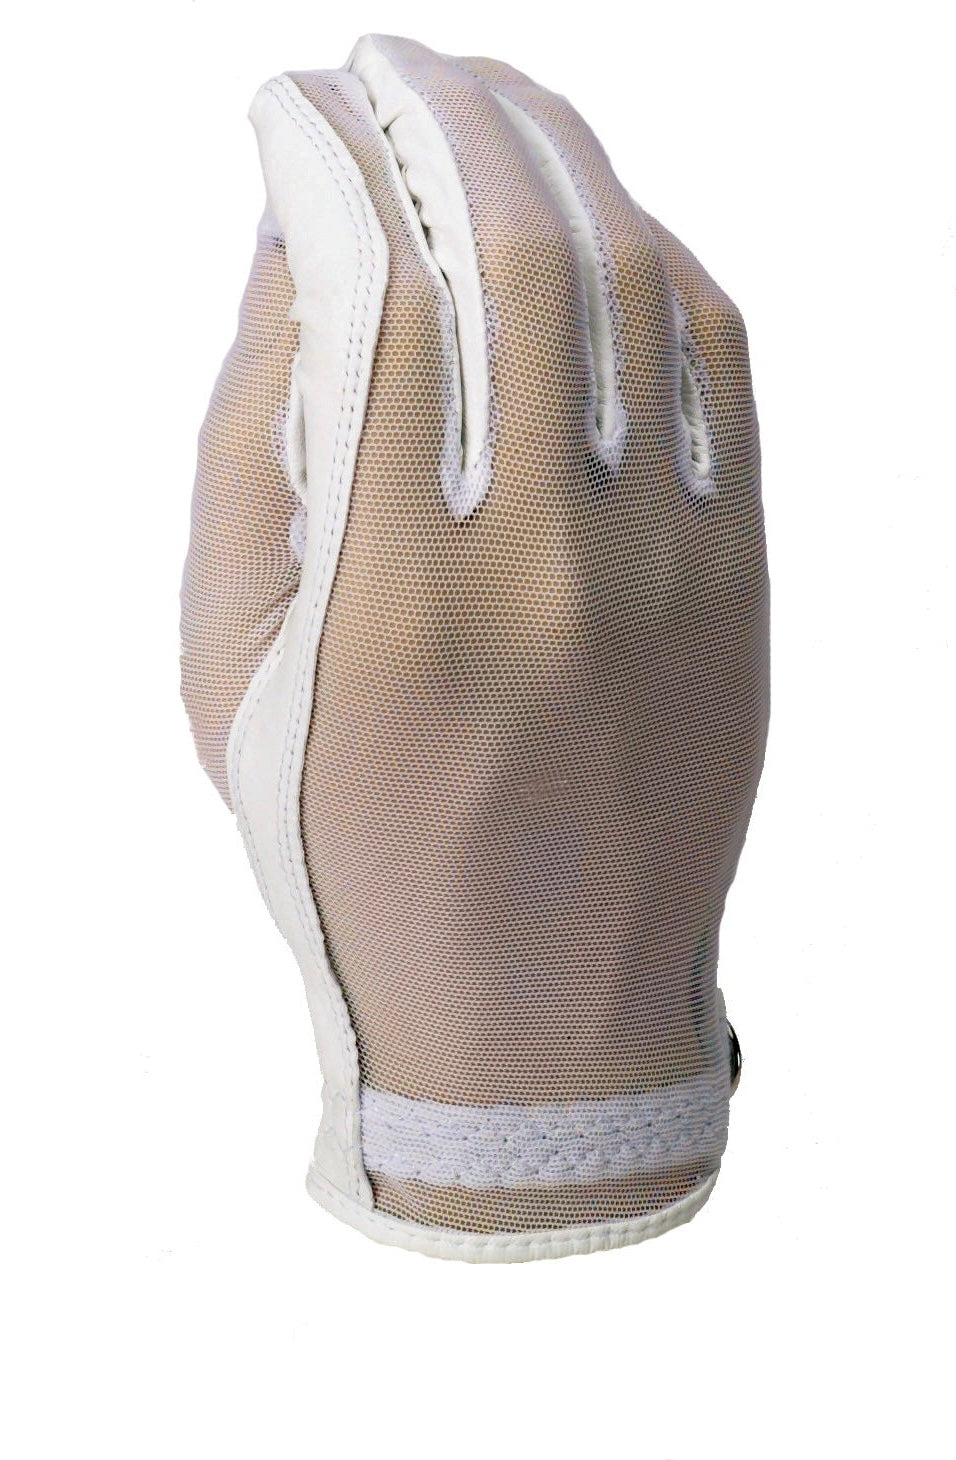 Evertan- White Golf Glove (For RightHand)